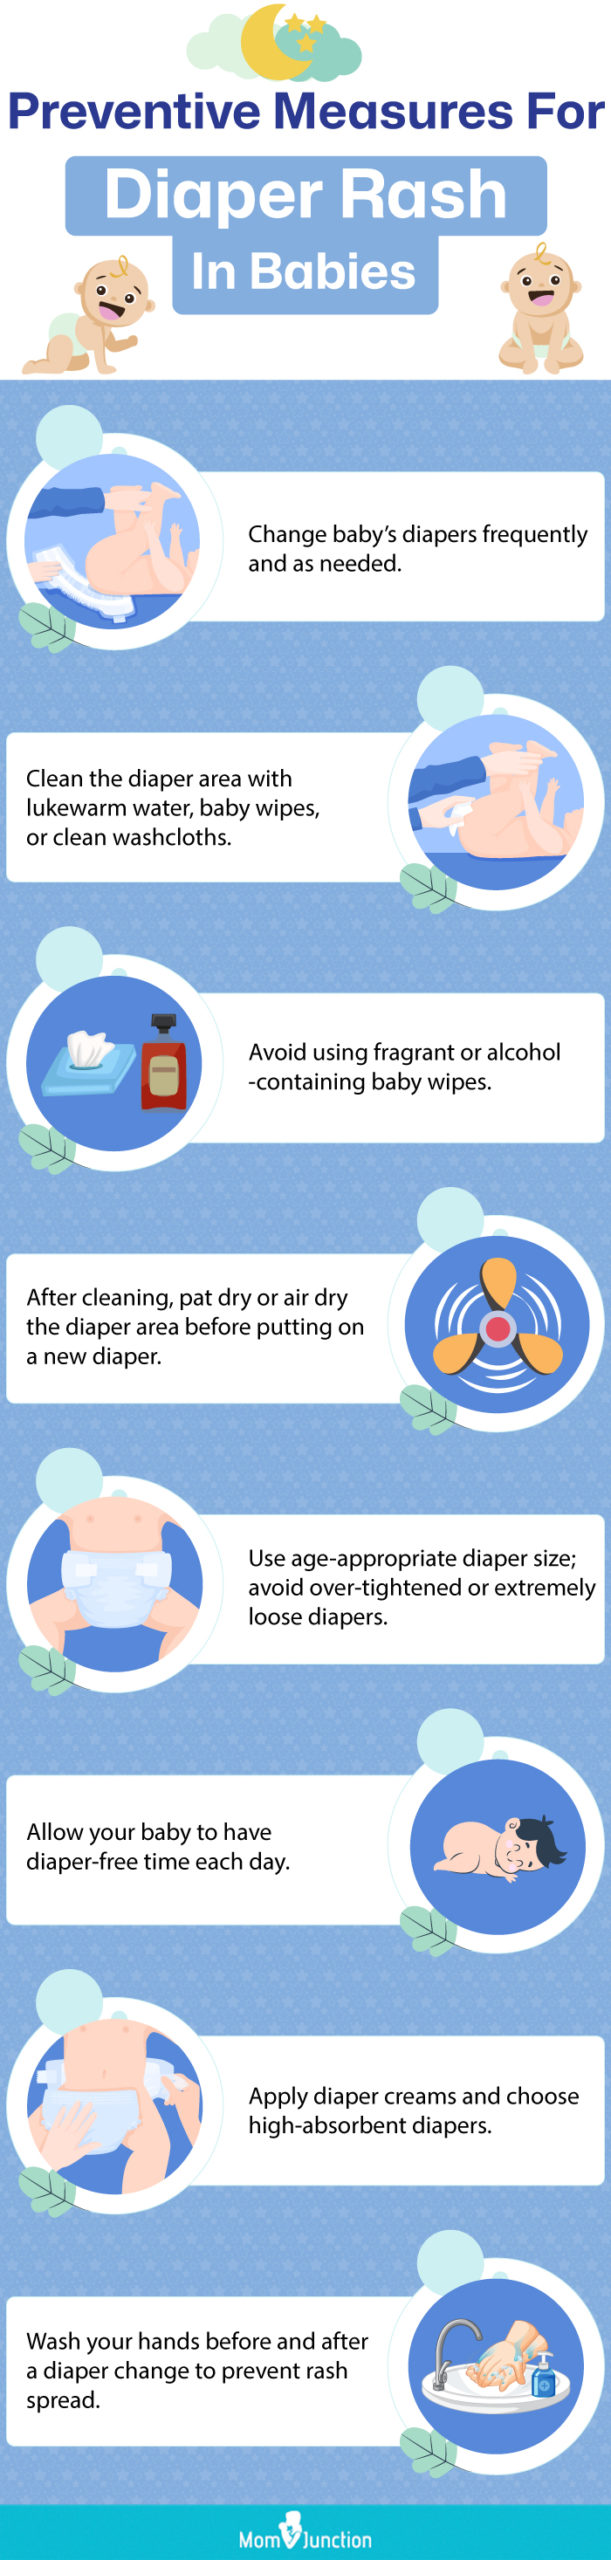 preventive measures for diaper rash in babies (infographic)